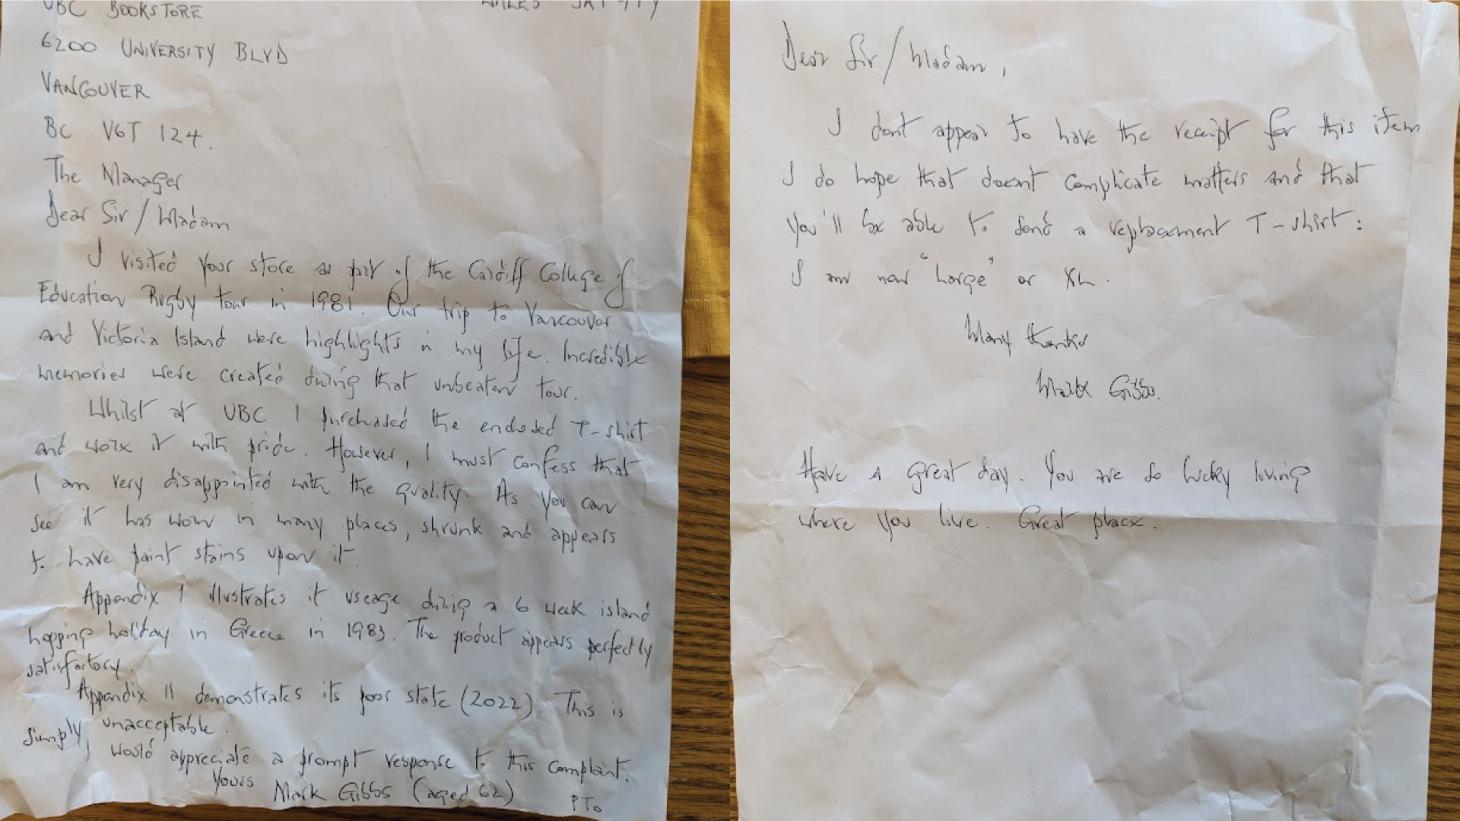 Handwritten letter to UBC Bookstore from rugby player about UBC t-shirt